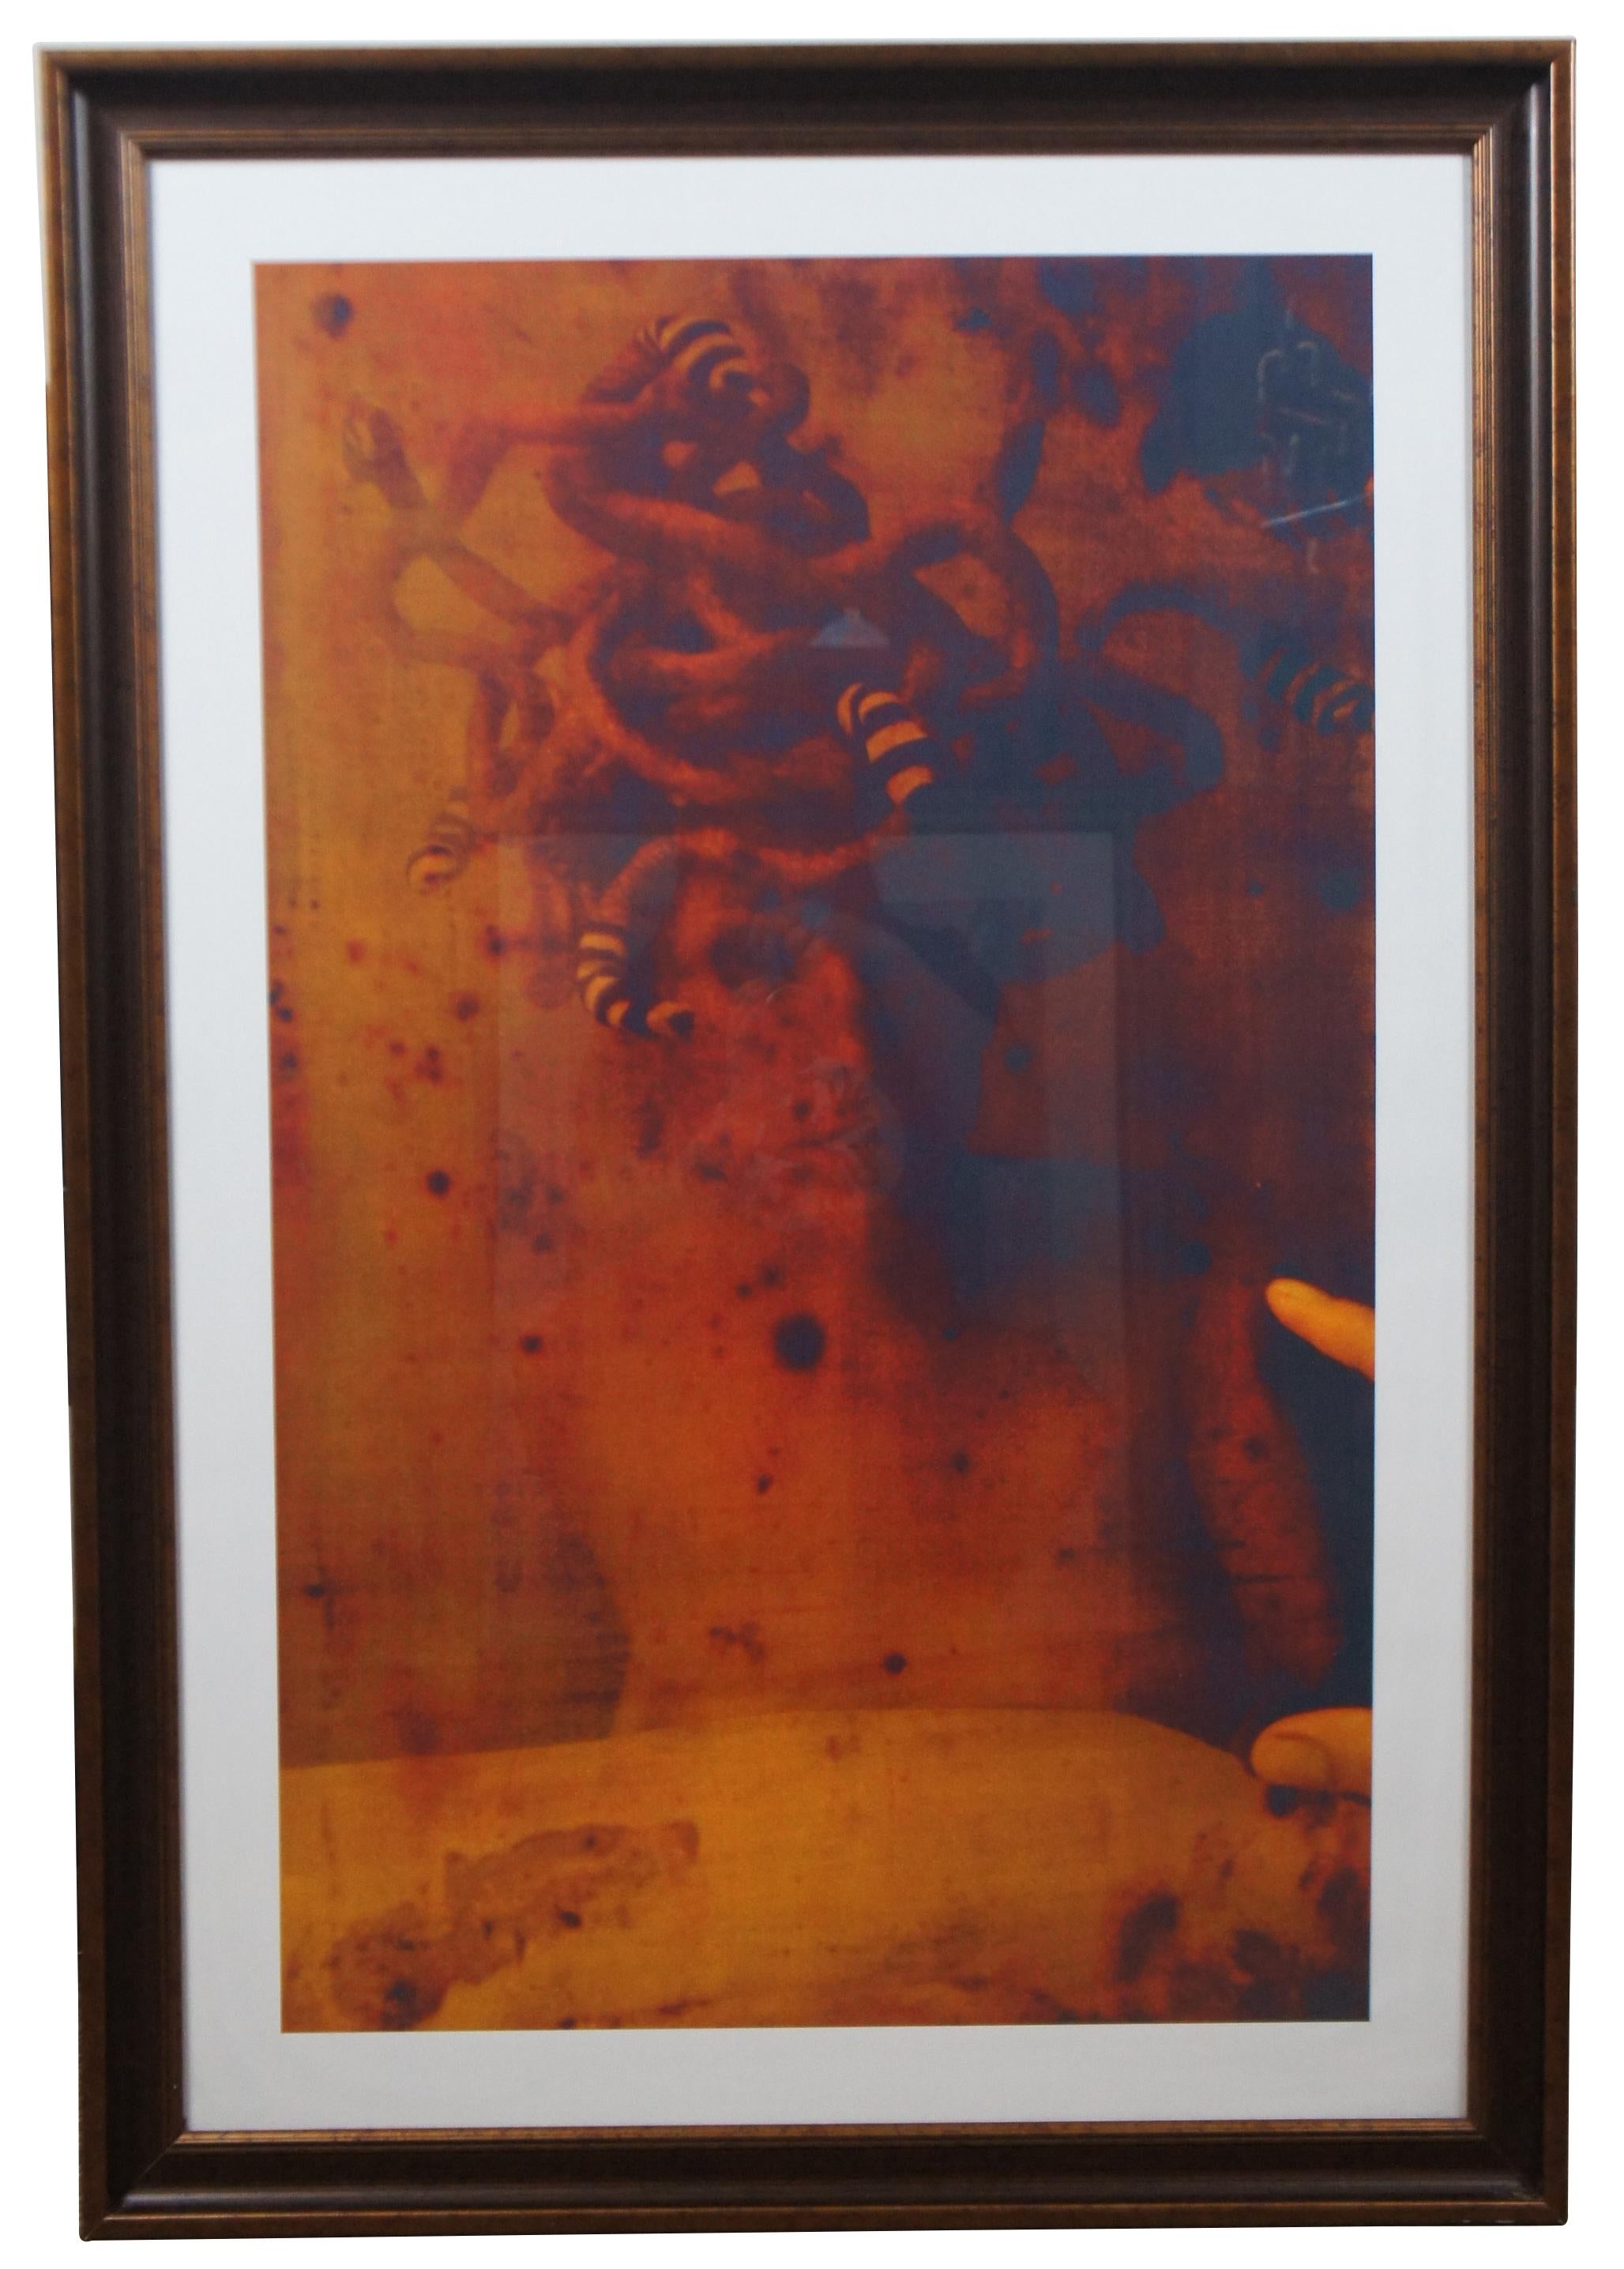 Set of three modern surrealist double exposure prints in shade of orange and red, showing a female figure with Medusa-like serpentine hair accented with peculiar ring-tailed segments.

Measures: 27” x 1.25” x 38.75” / Sans Frame - 23.5” x 35.5”